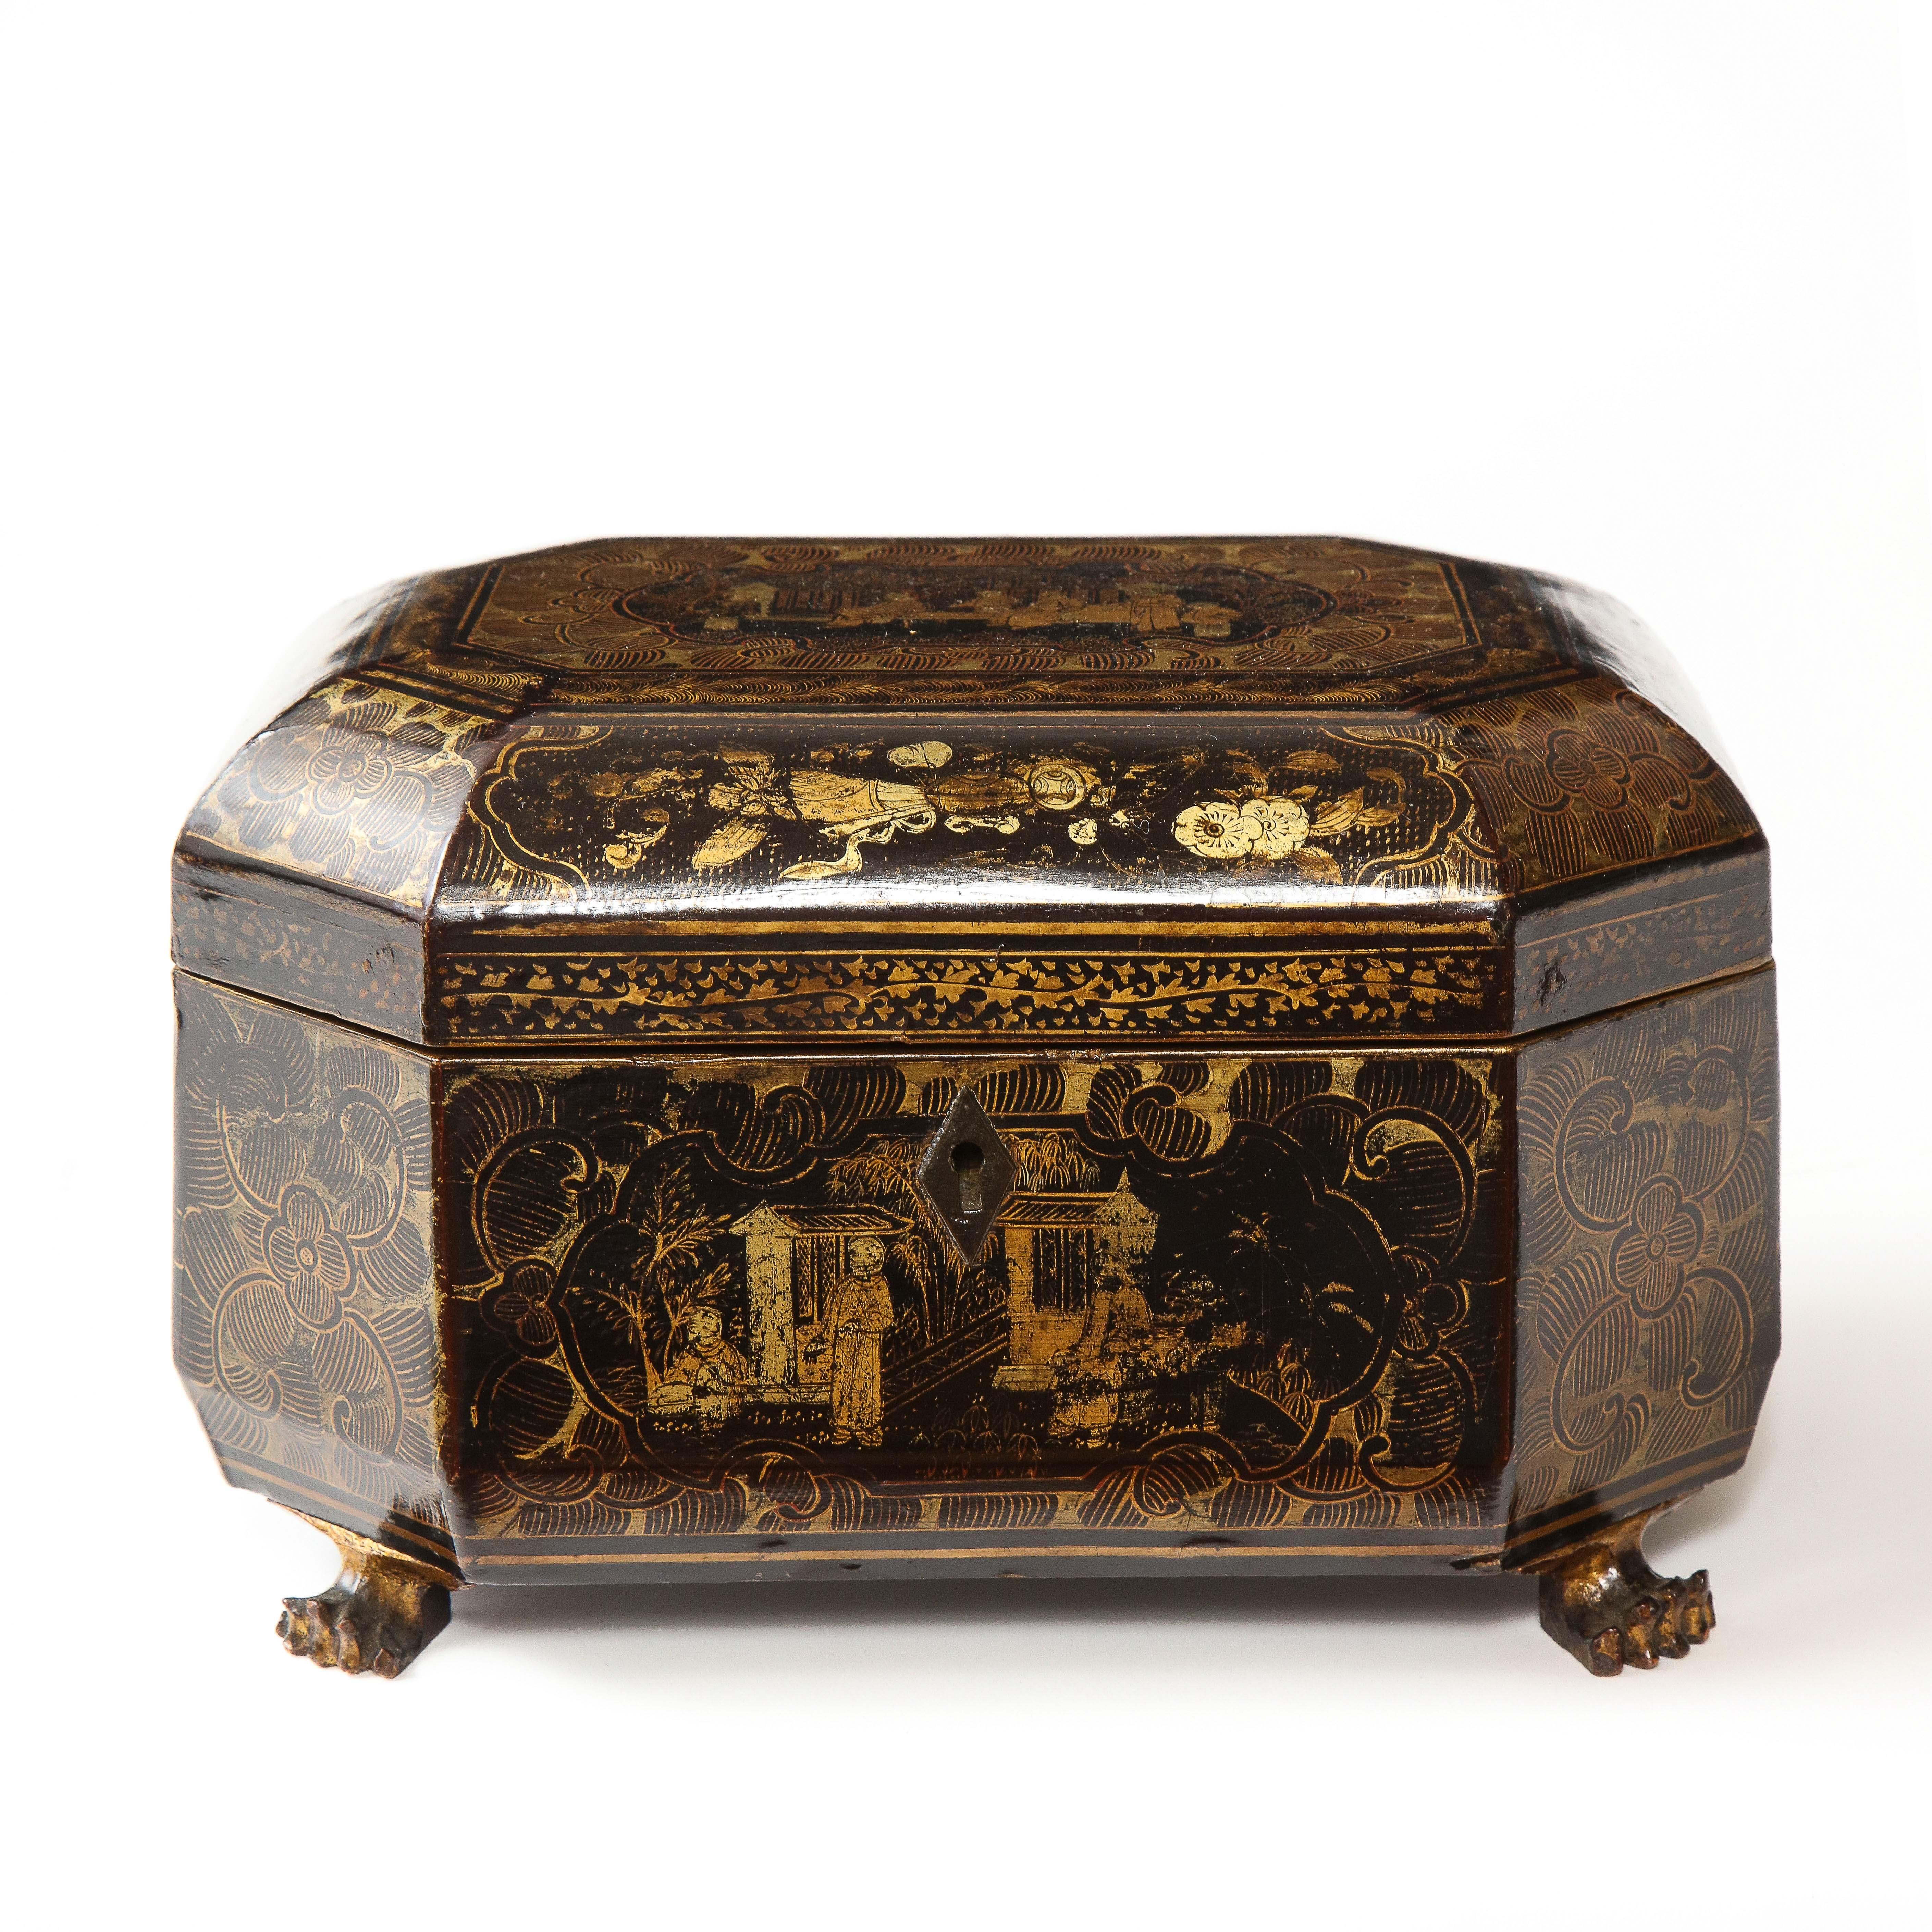 The rectangular box with canted corners, opening to a lacquered interior; decorated overall with floral and foliate motifs and cartouches of floral sprays and temples; on gilt claw feet.